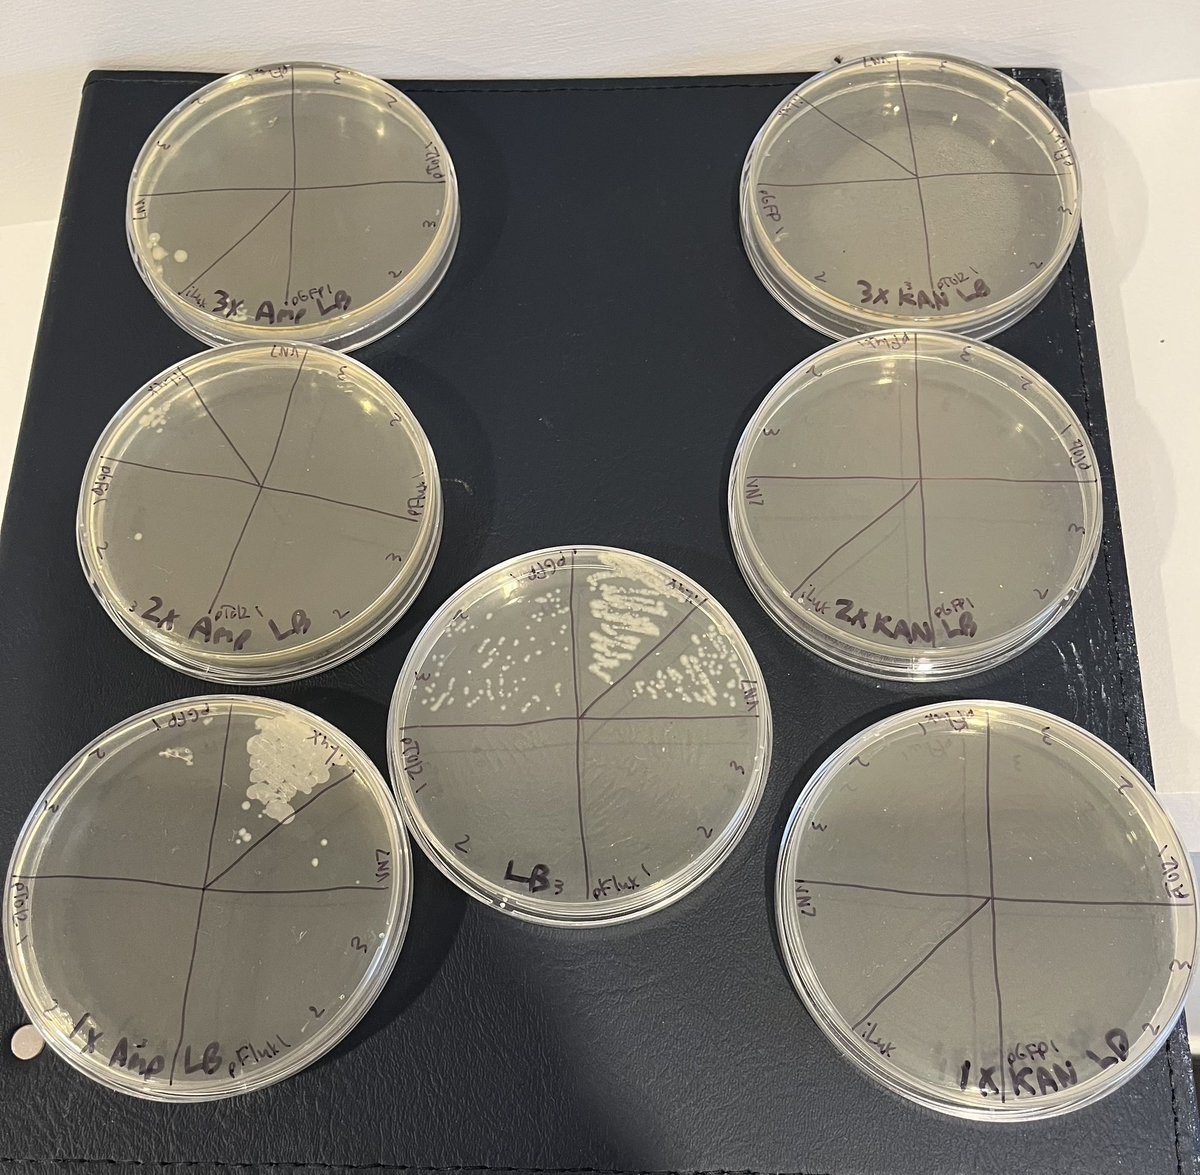 #DIYbio Antibiotic selection appears to be working from old freezer stocks, but I’ll be making plates and growth media fresh moving forward. Interesting, not all strains seem to have lost all viability after several months at 4C.